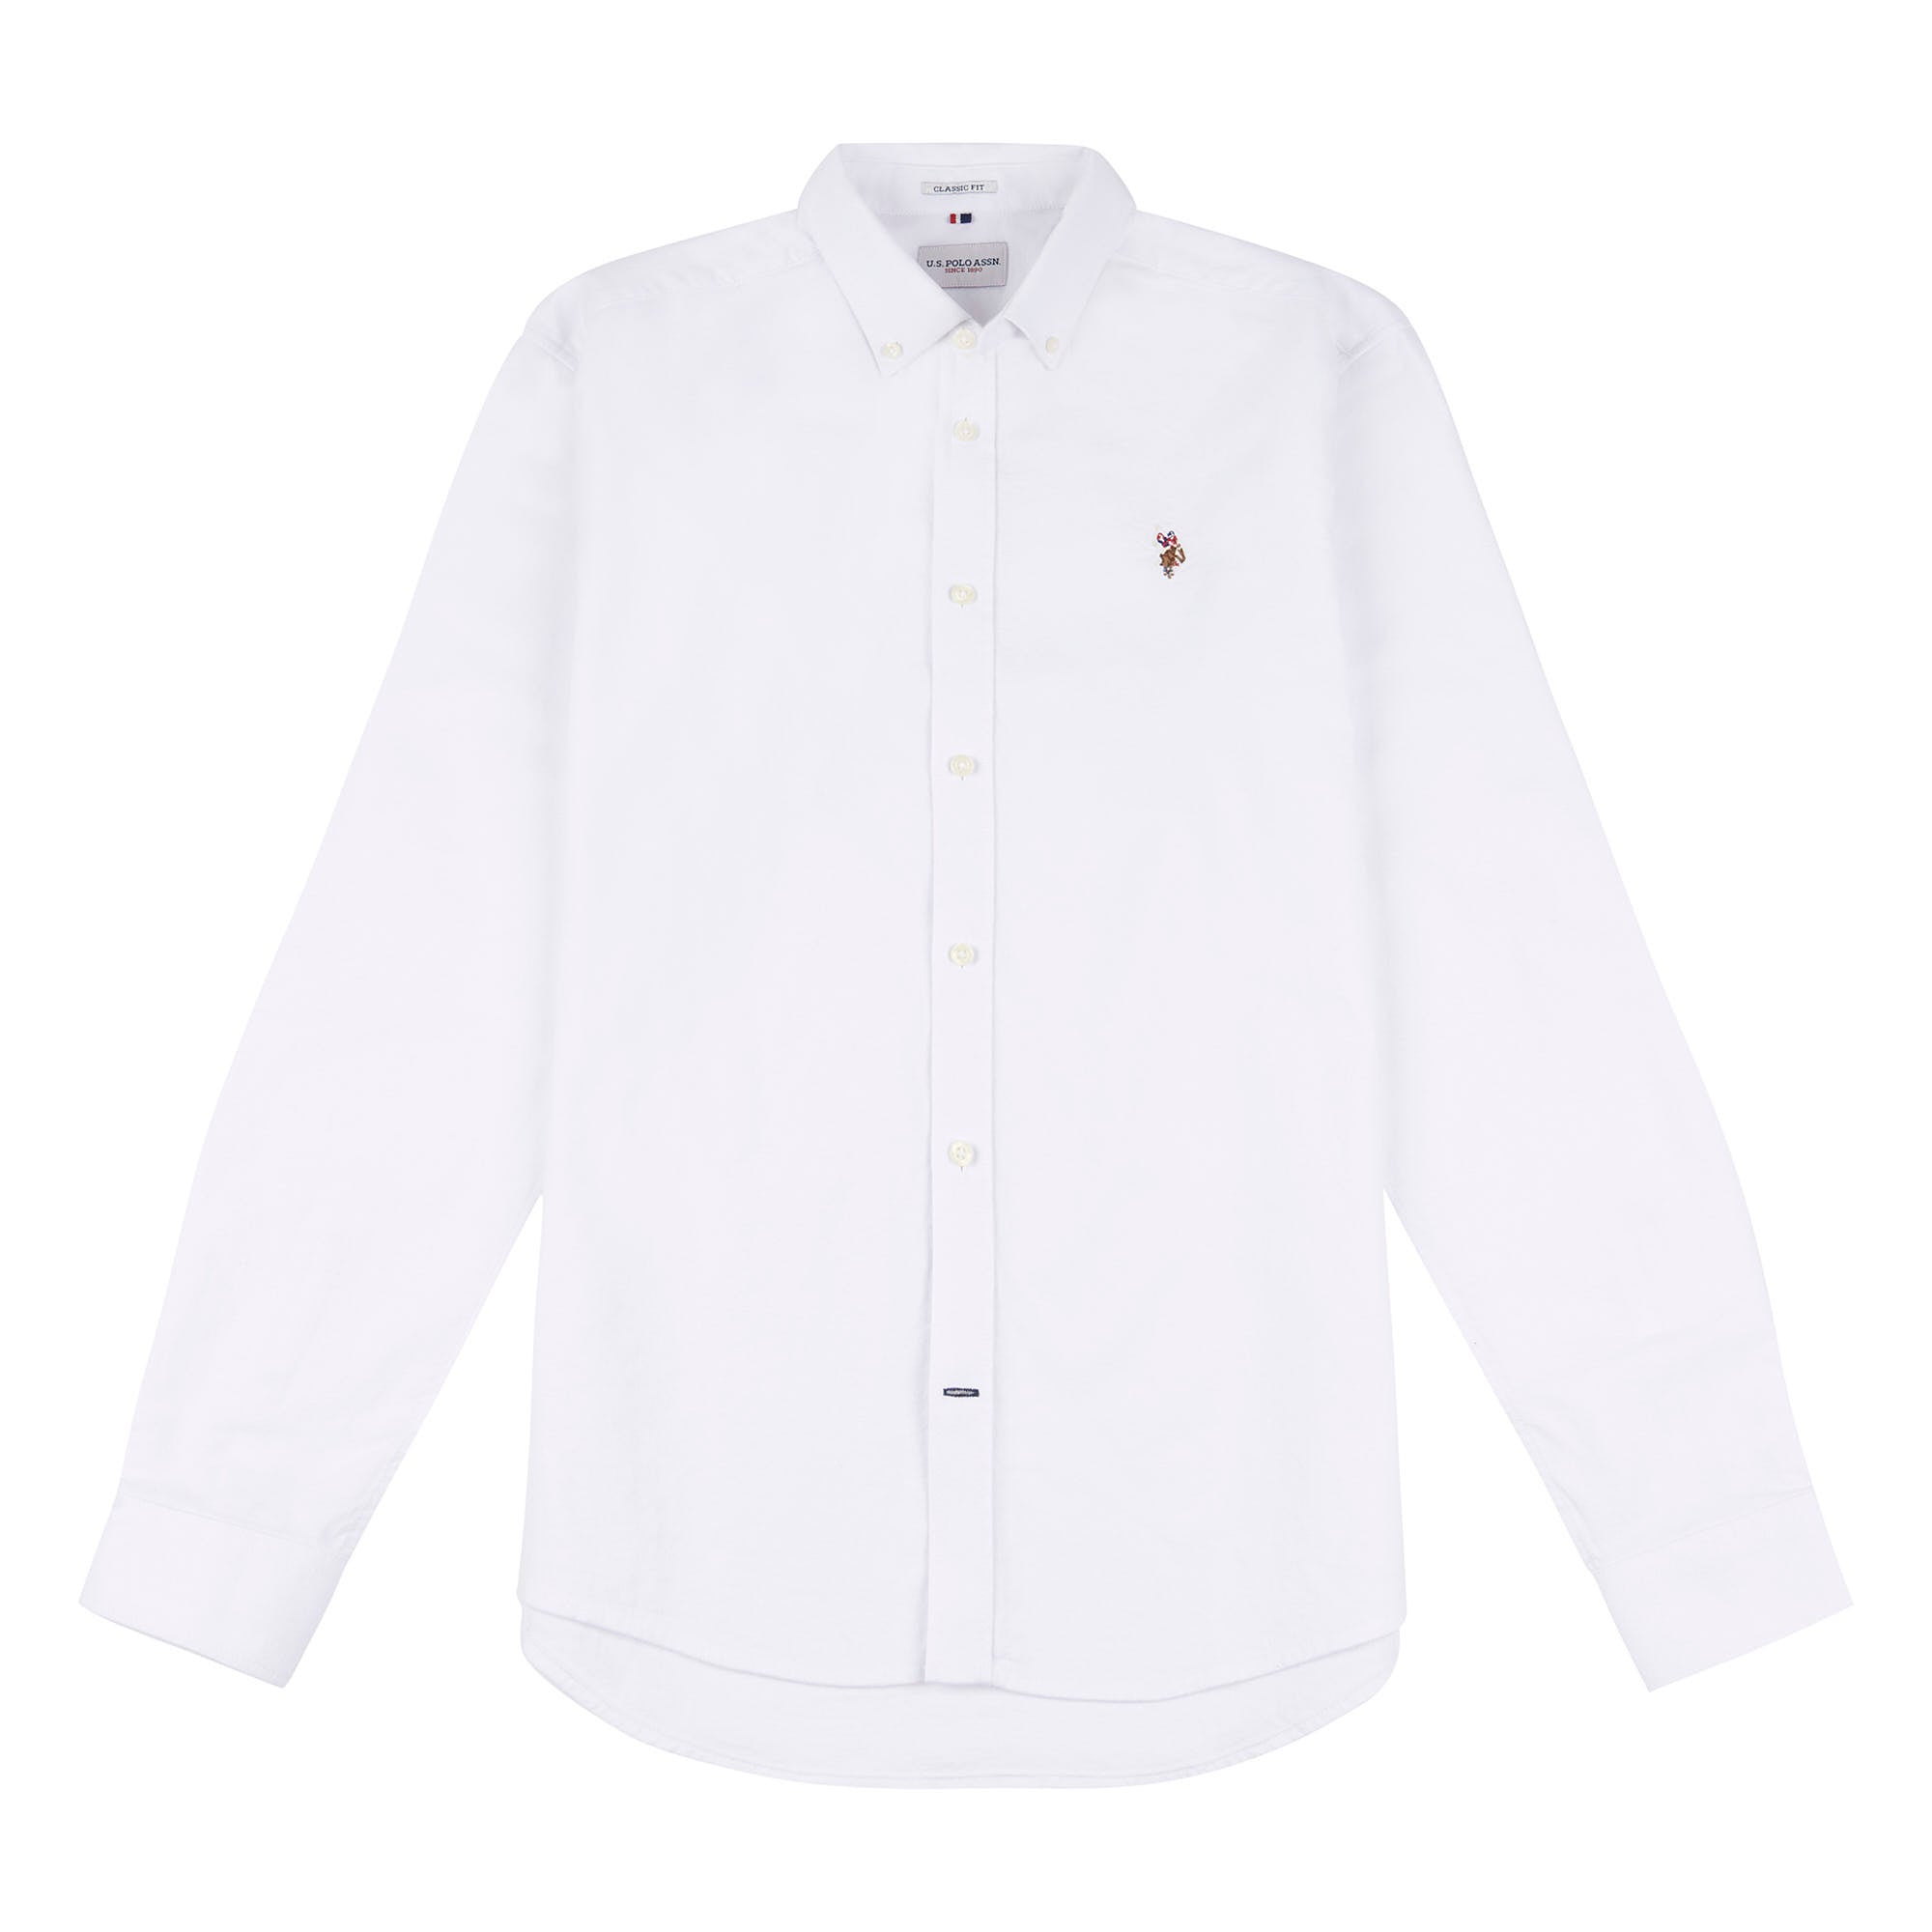 Mens Oxford Shirt in Bright White